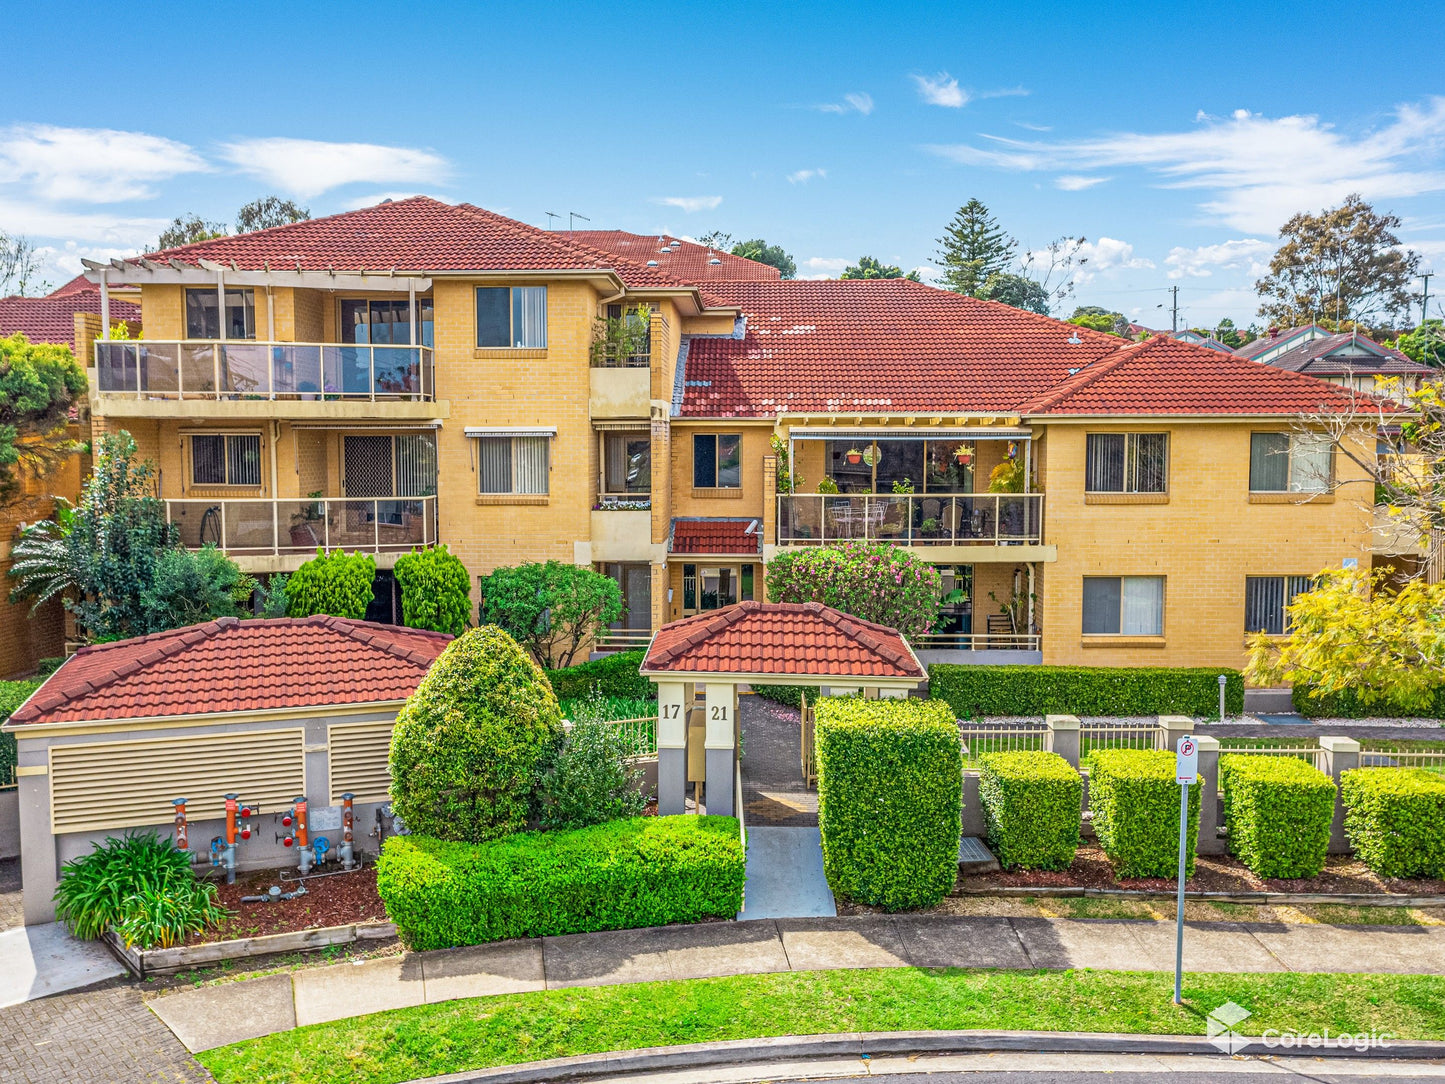 9/17-21 Meryll Avenue, Baulkham Hills NSW 2153 - JUST SOLD! Reach out to me for your buying and selling needs.